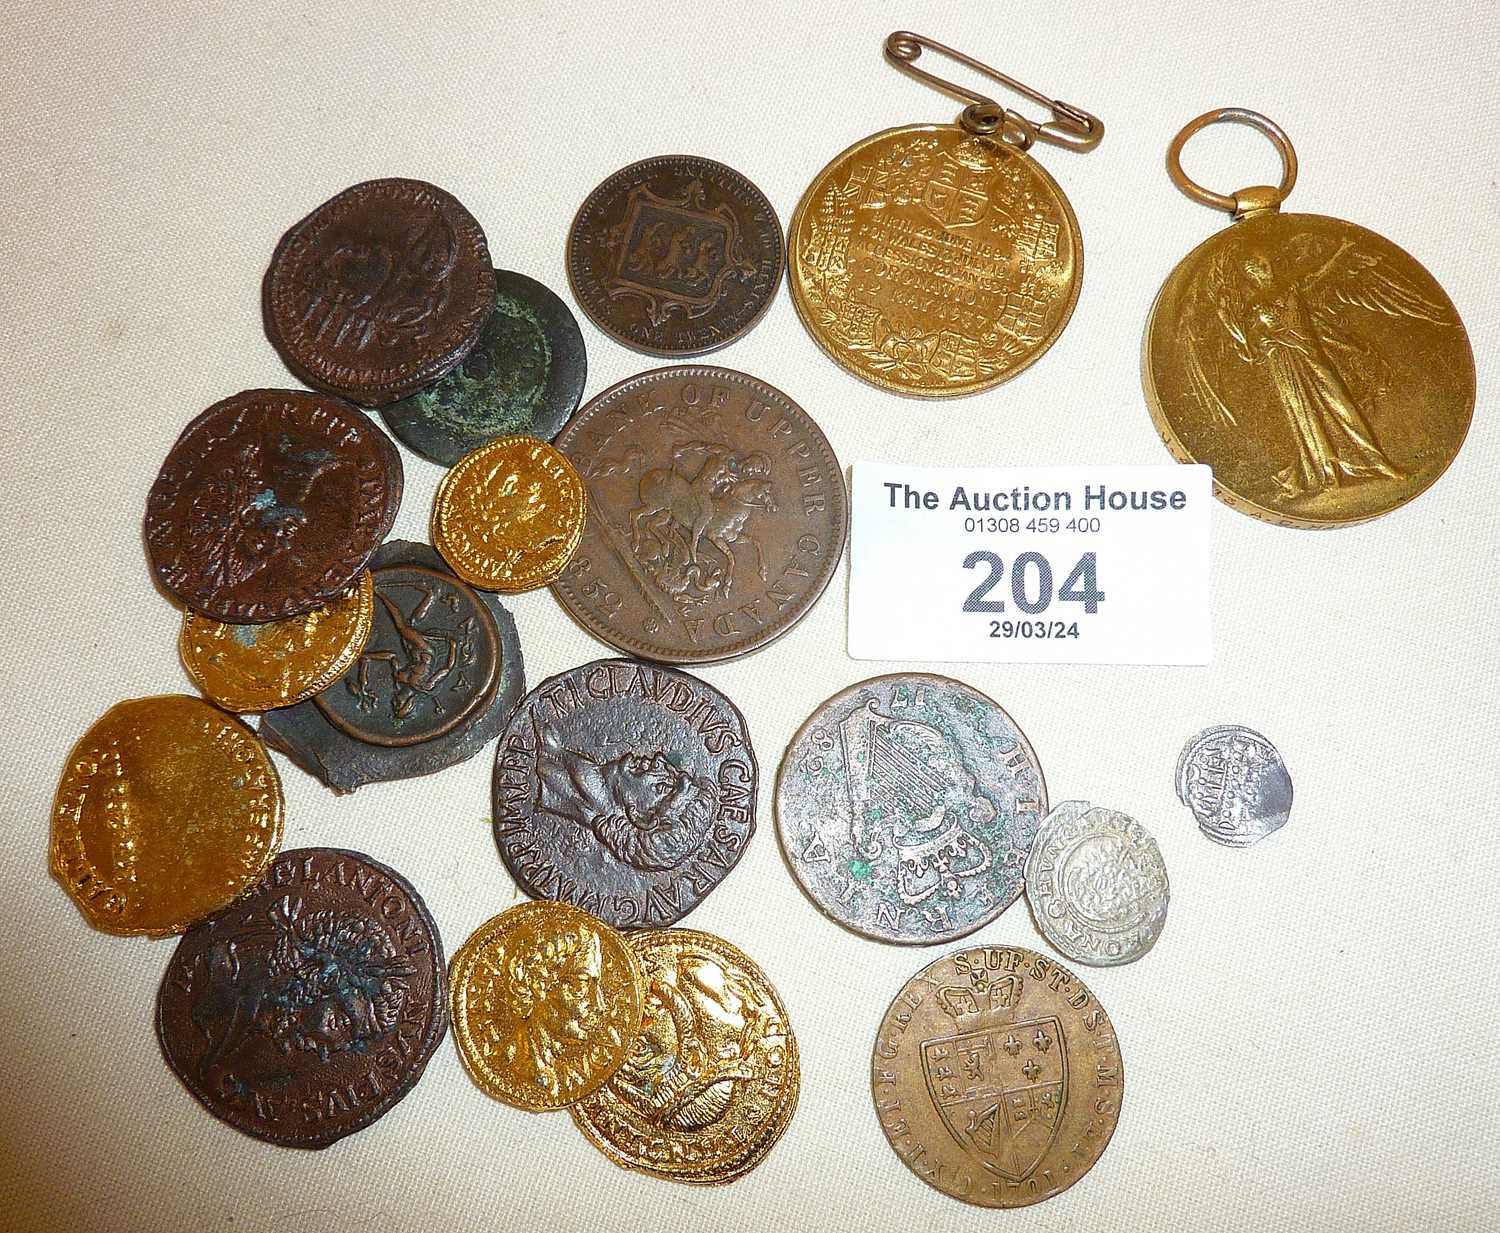 Reproduction Roman and other coins, and a WW1 medal for J.47713 A.C. HALLETT A.B. R.N. - Image 2 of 2